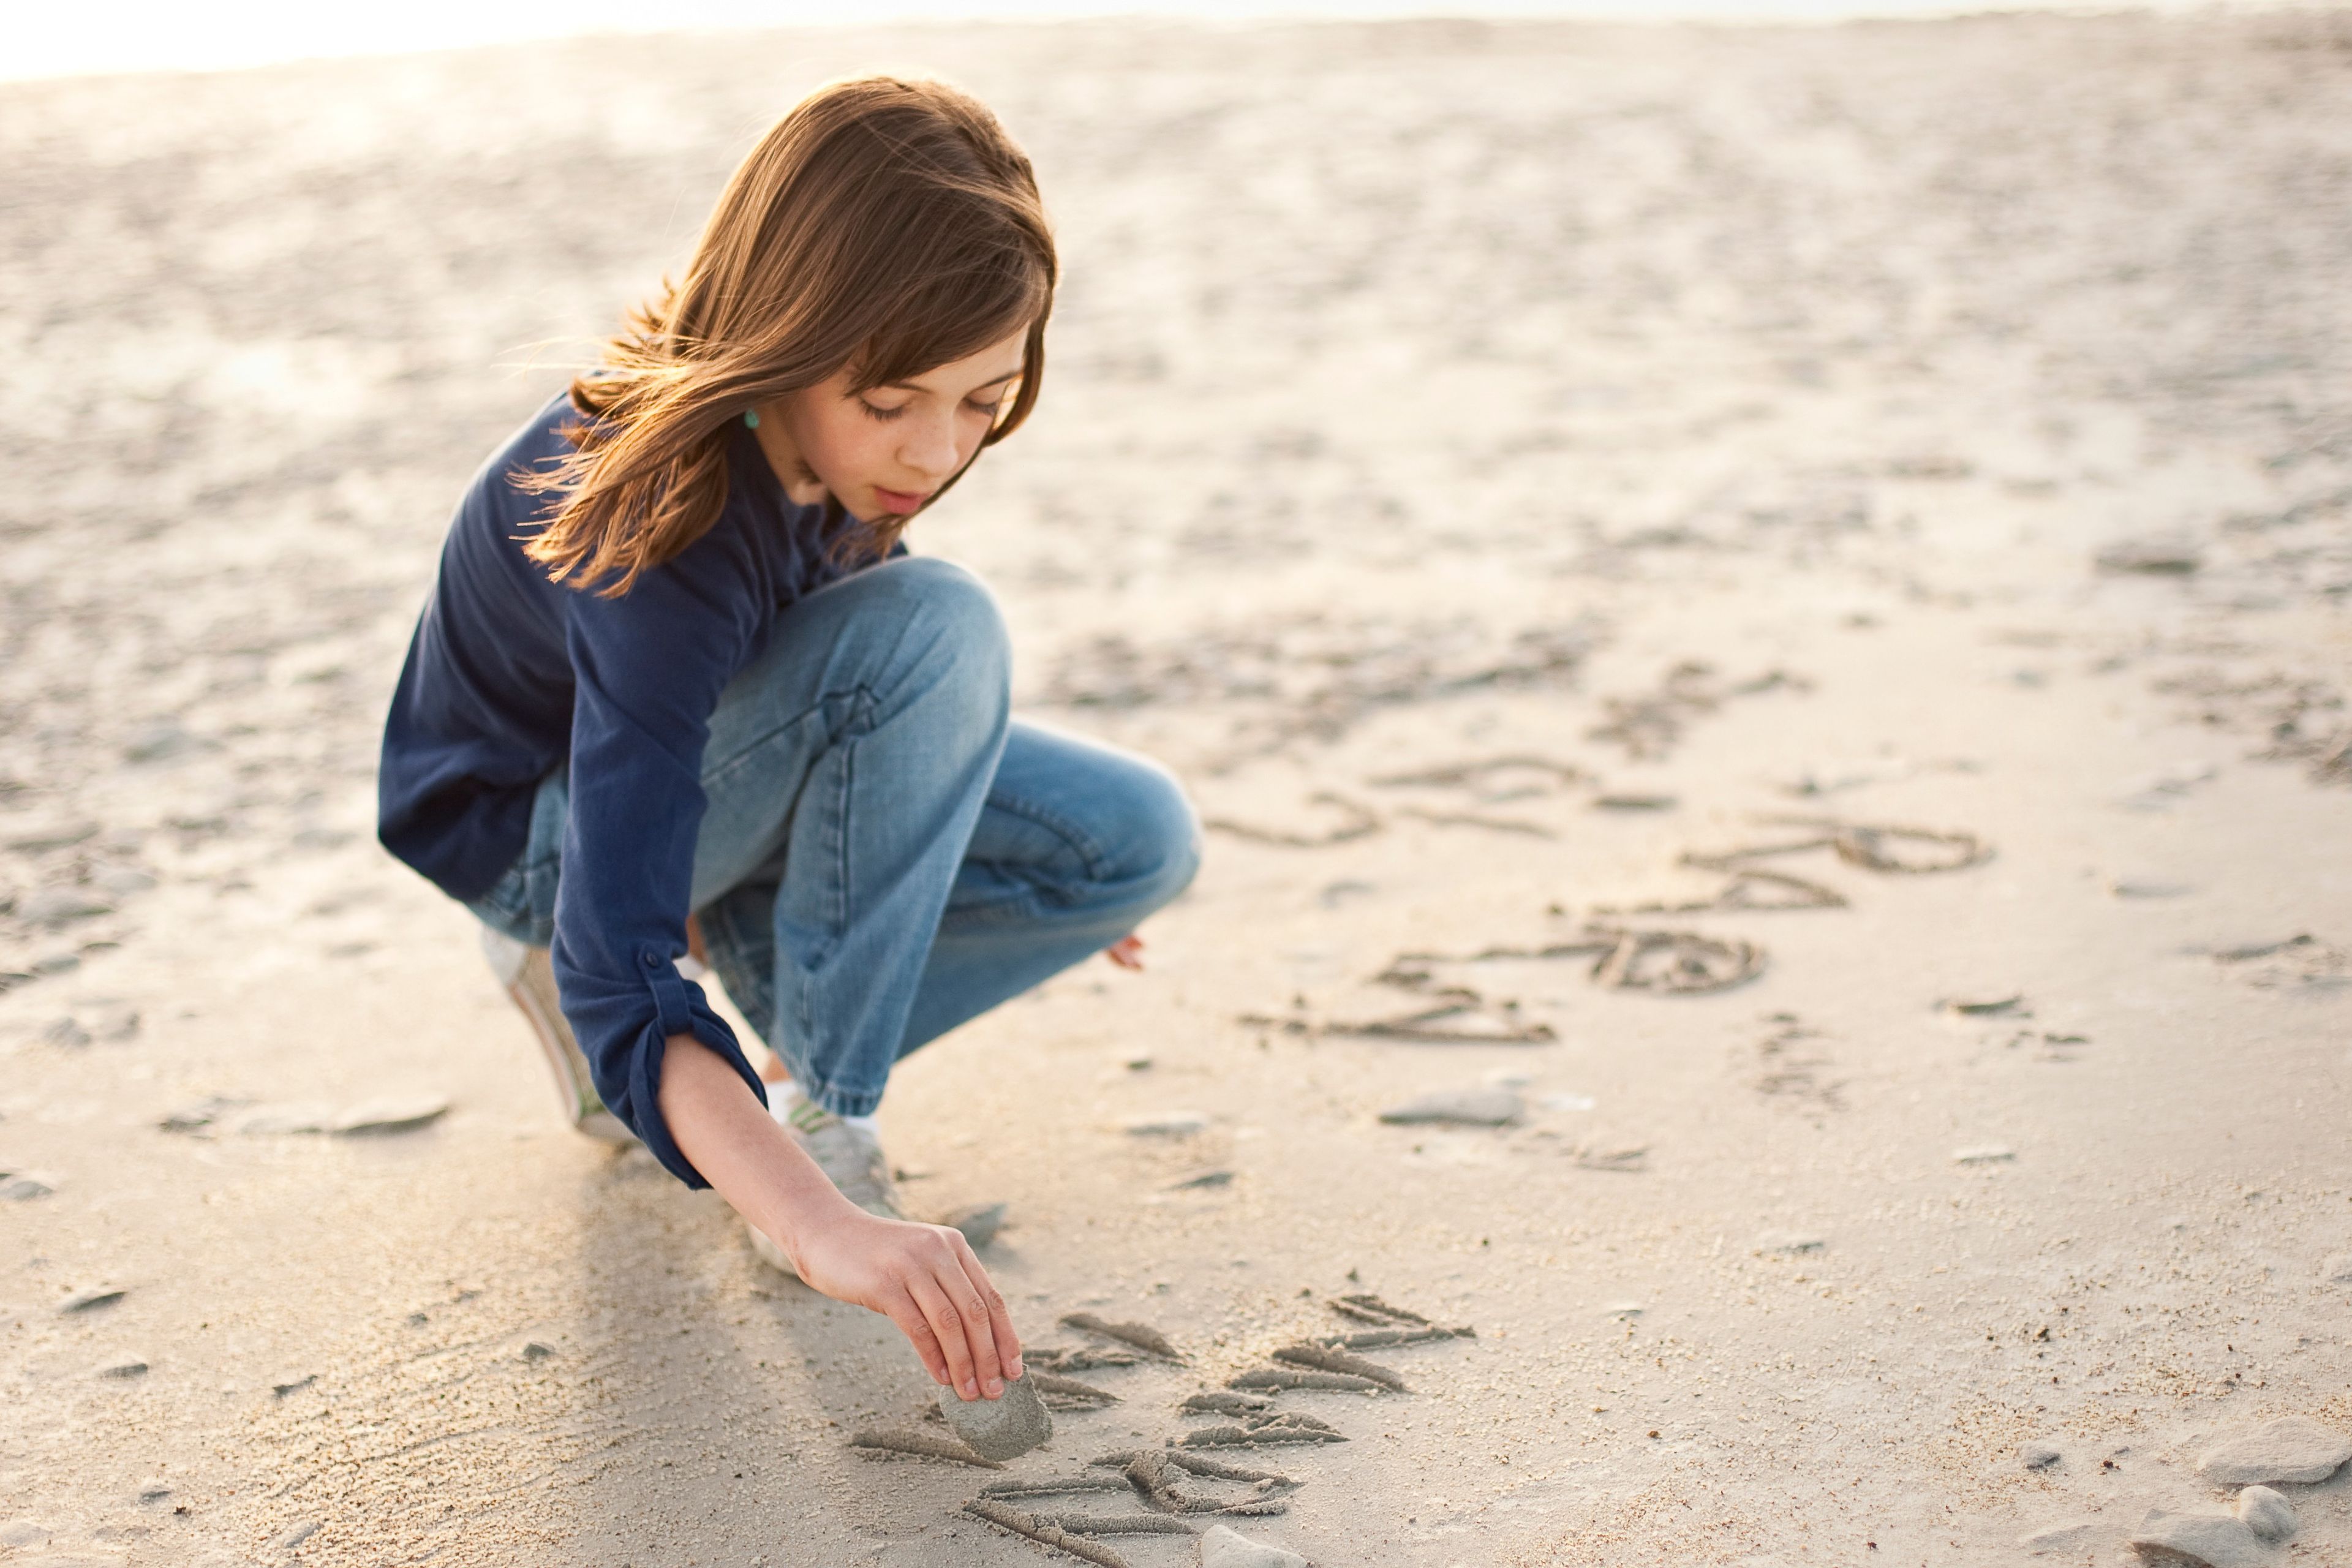 A girl draws in the sand.